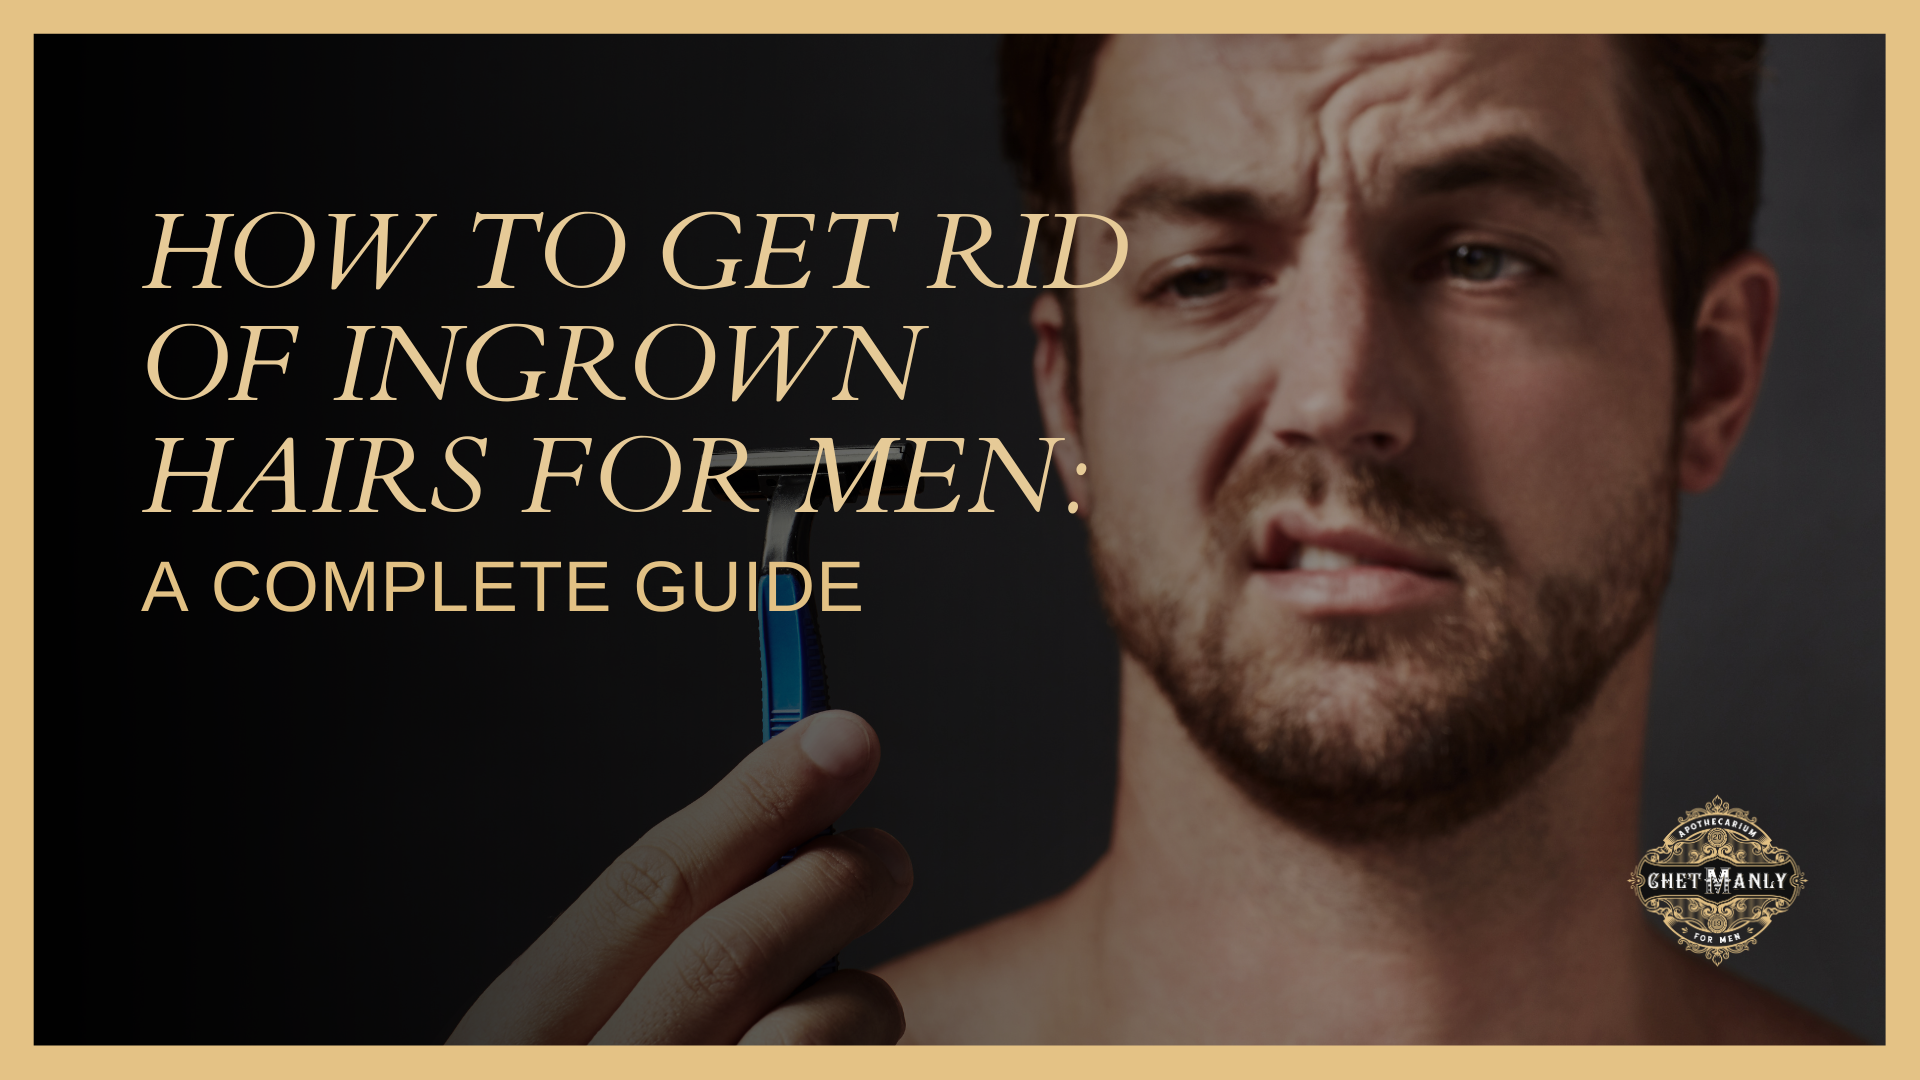 How to Get Rid of Ingrown Hairs for Men: A Complete Guide